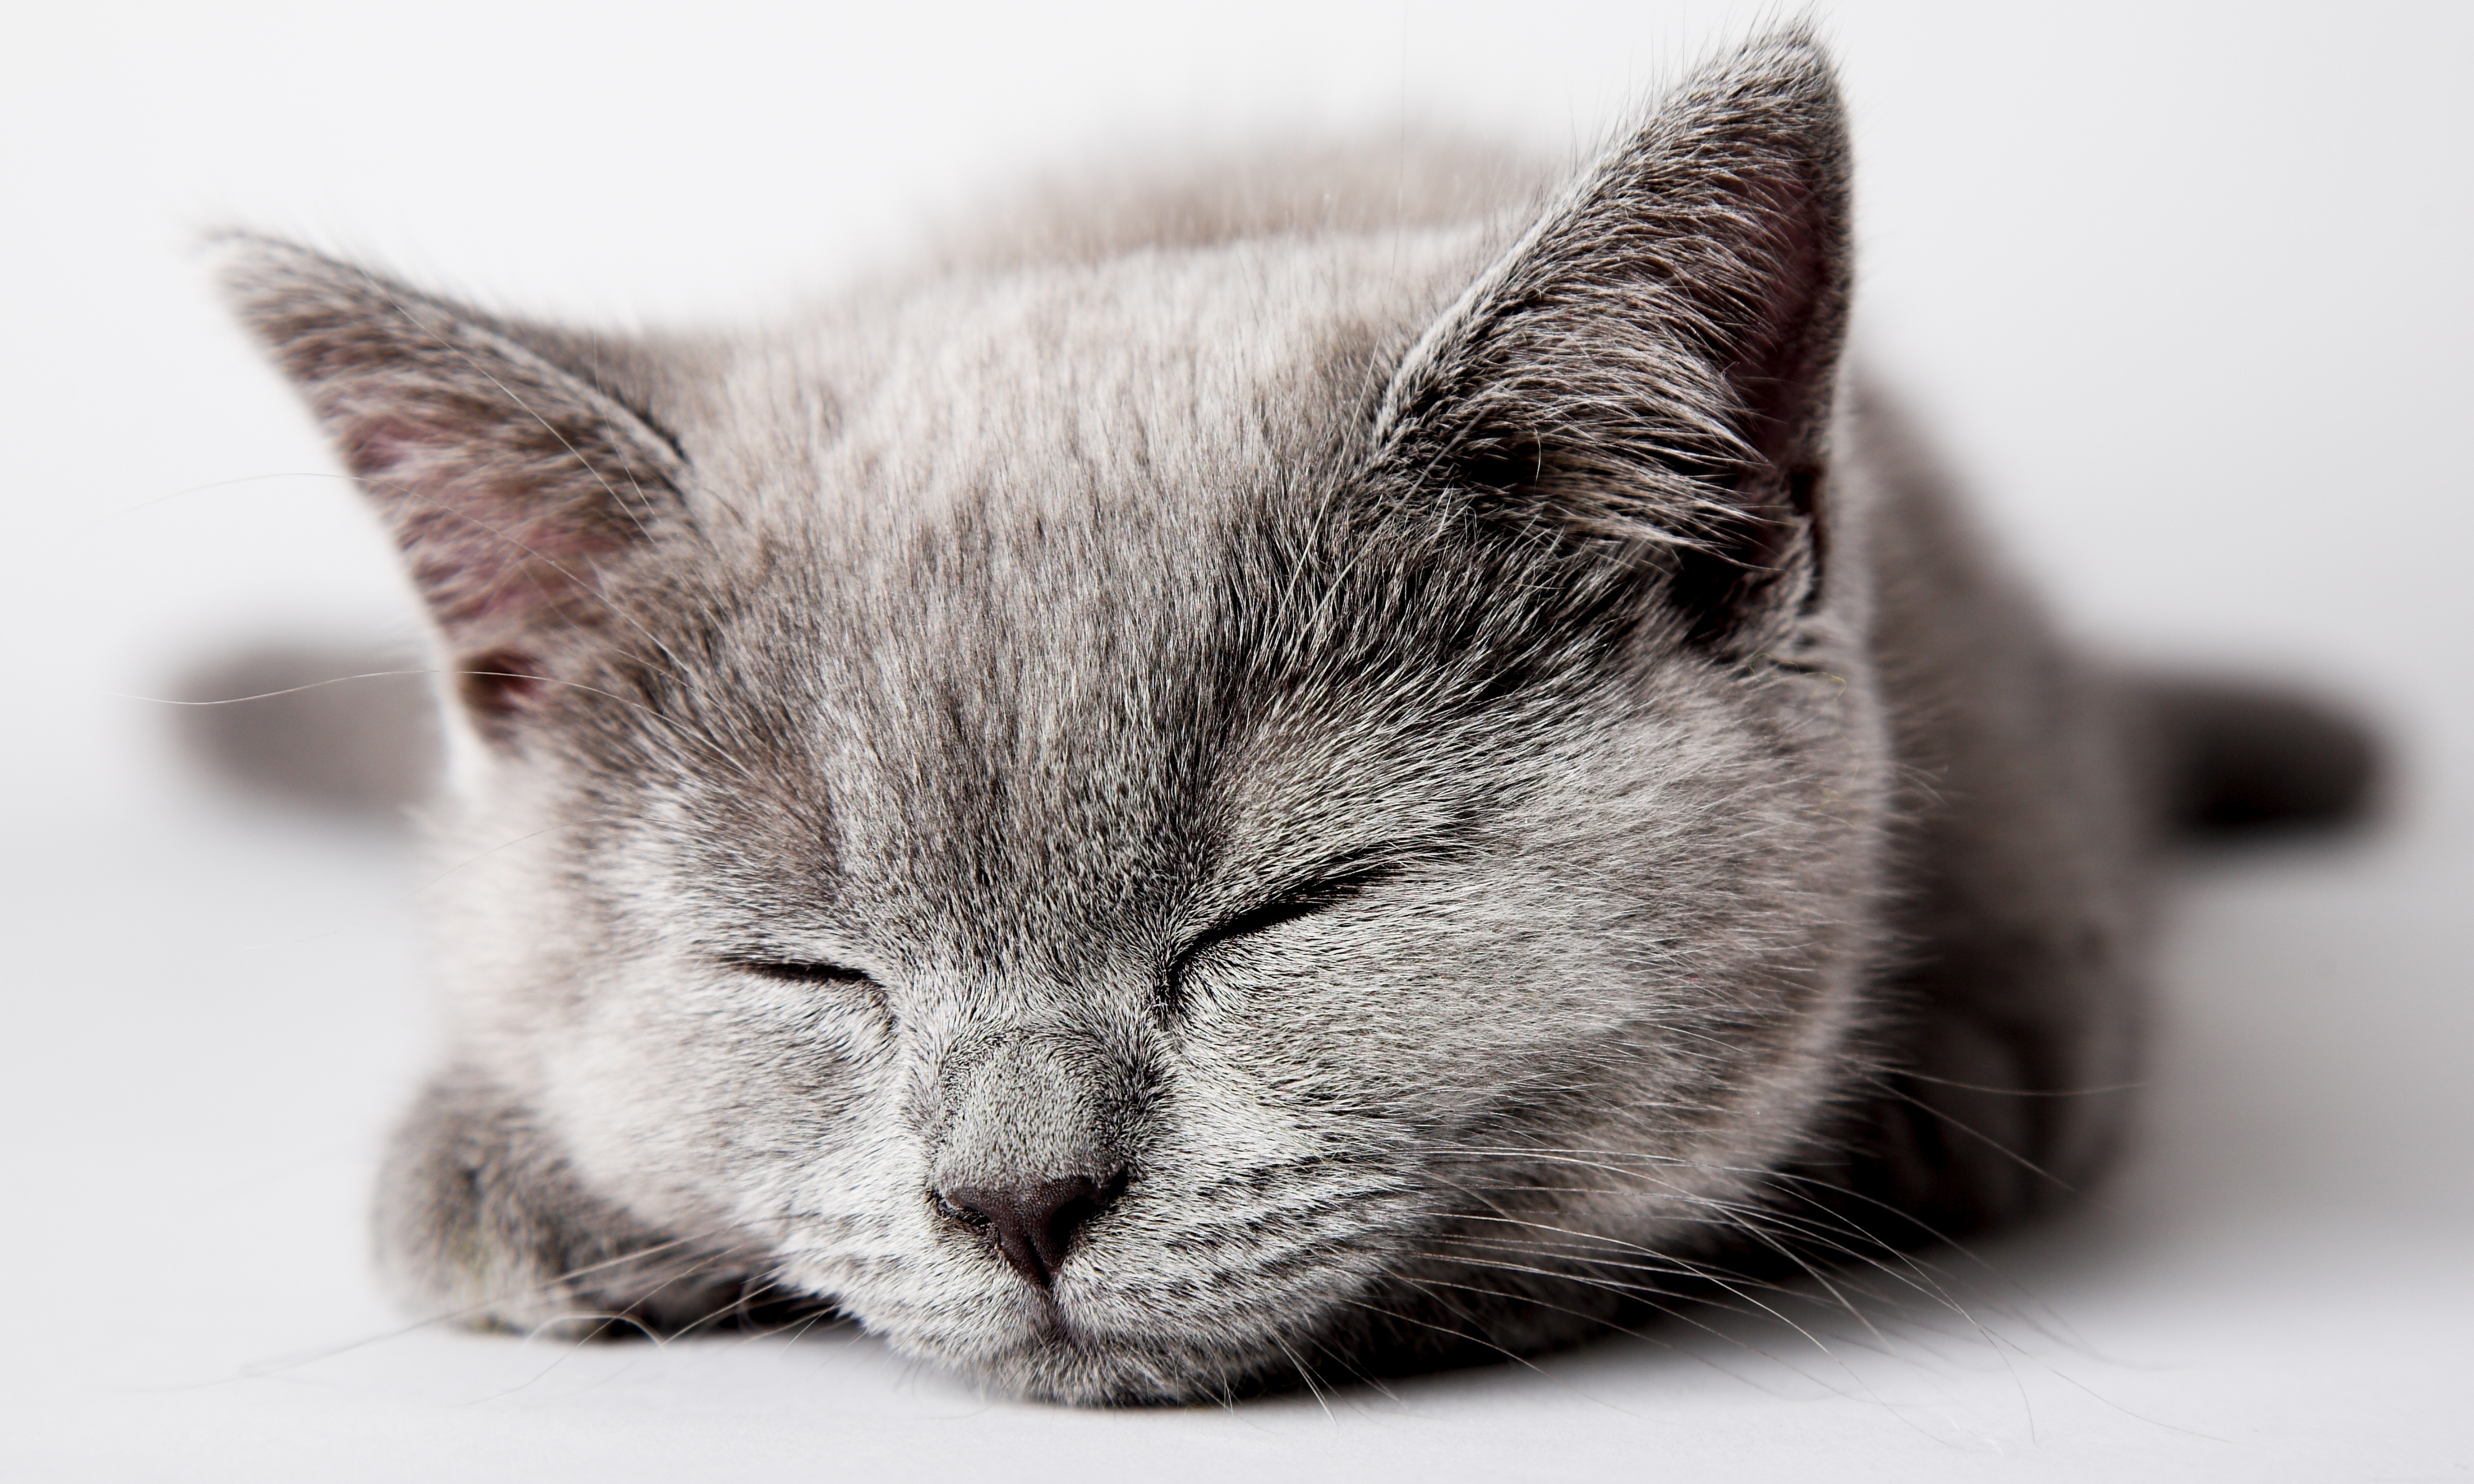 86388 3840x2160 PC pictures for free, download sleep, animals, kitten, dream 3840x2160 wallpapers on your desktop